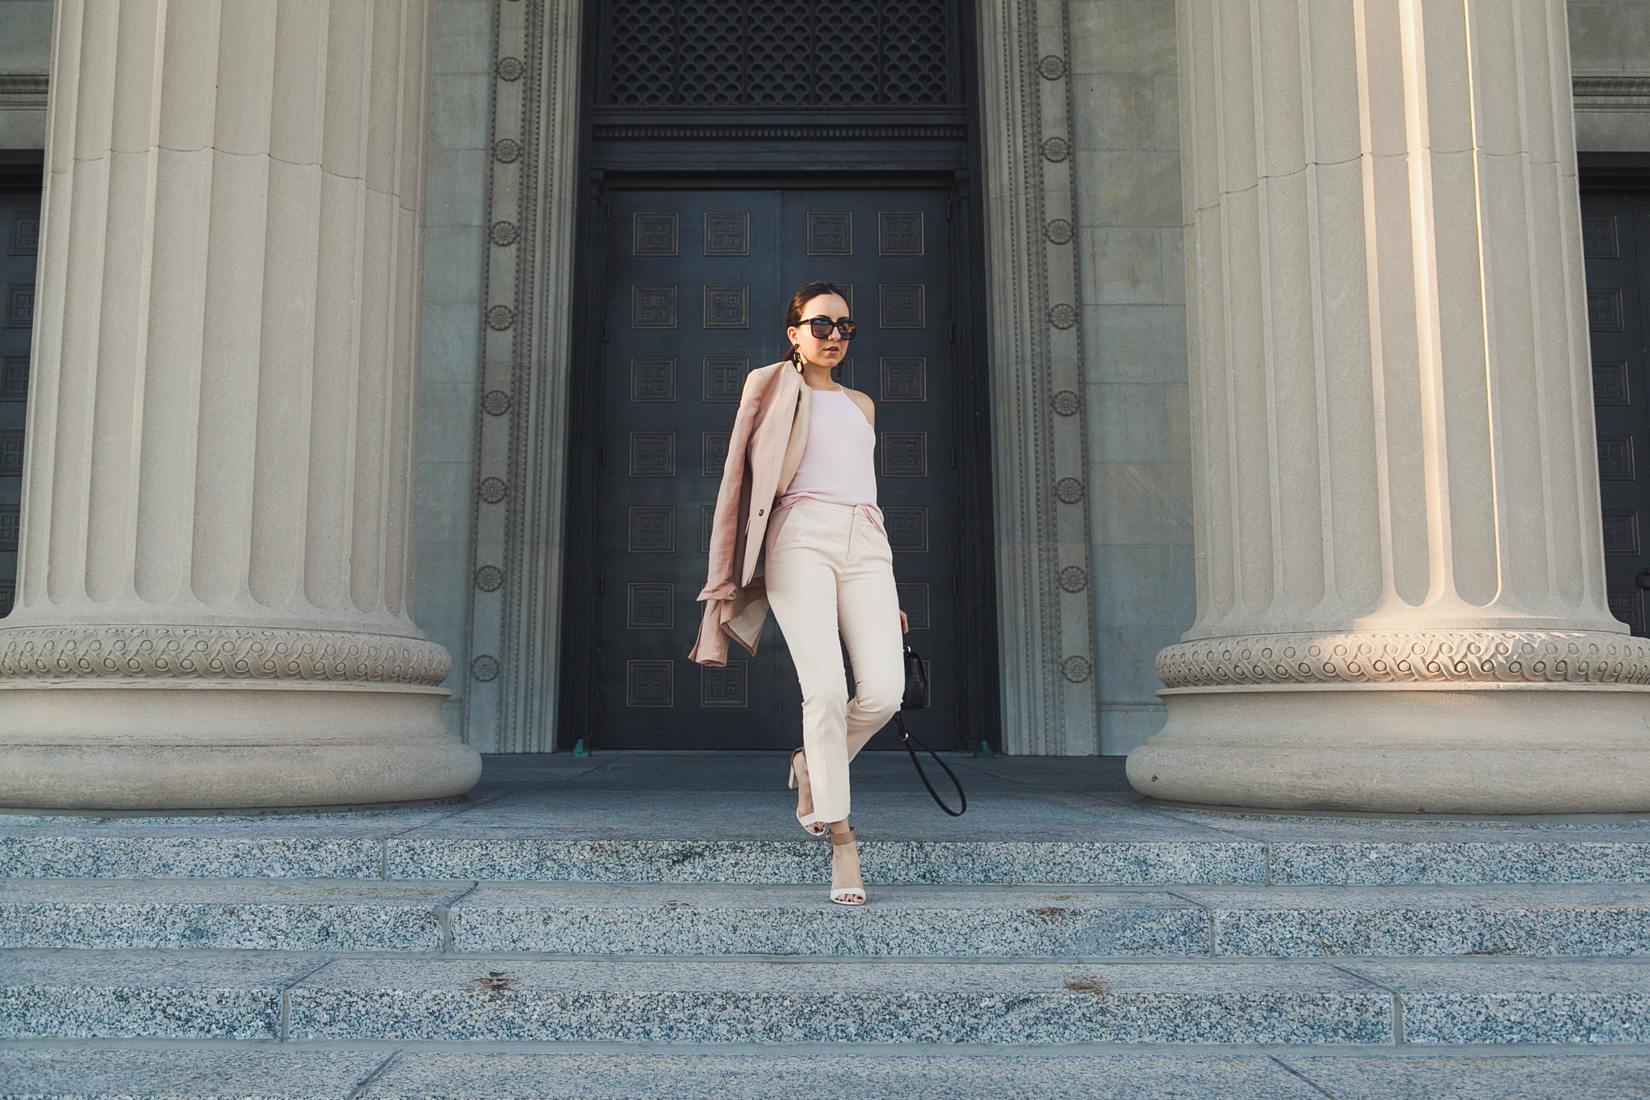 Yana Puaca of NoMad Luxuries wearing a pink suit from zara and loft and ann taylor Chicago for the Fall